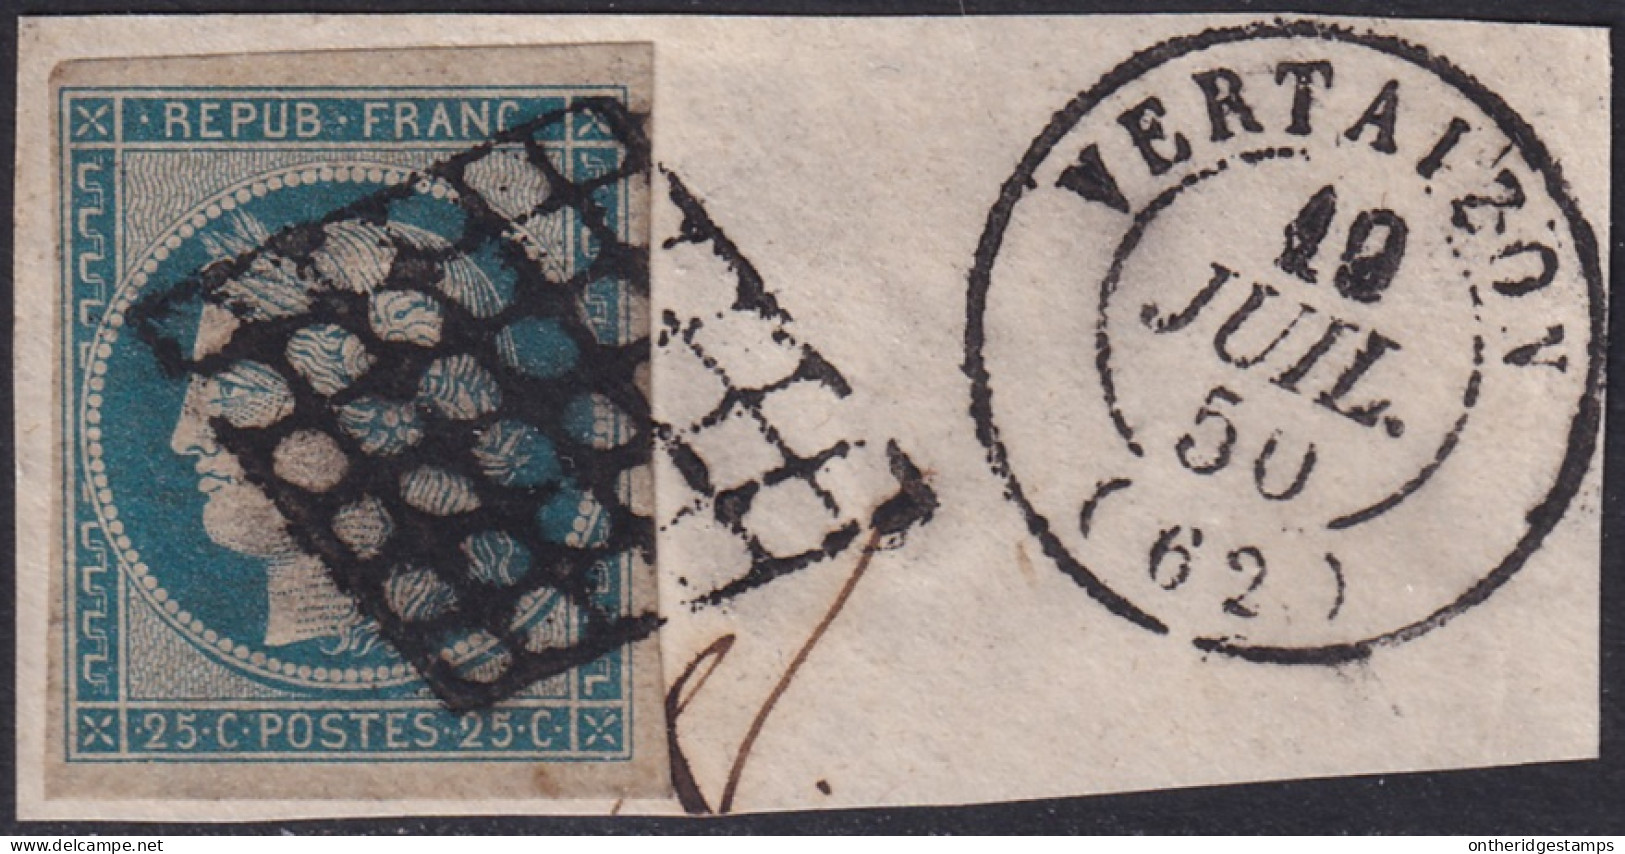 France 1850 Sc 6 Yt 4 Used Grille & Vertaizon Date Cancels On Piece - 1849-1850 Ceres